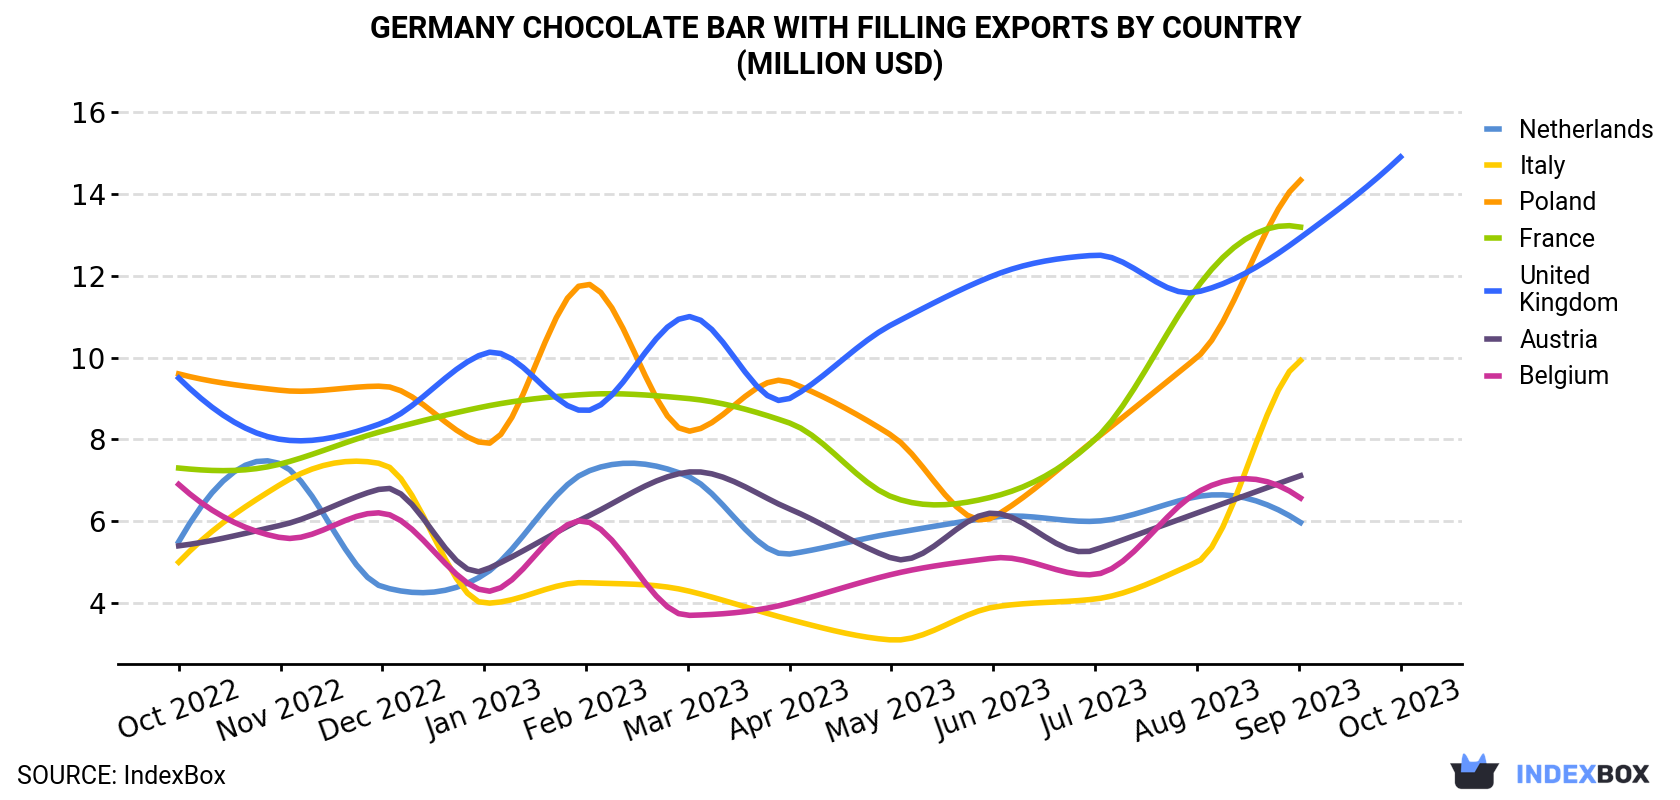 Germany Chocolate Bar With Filling Exports By Country (Million USD)